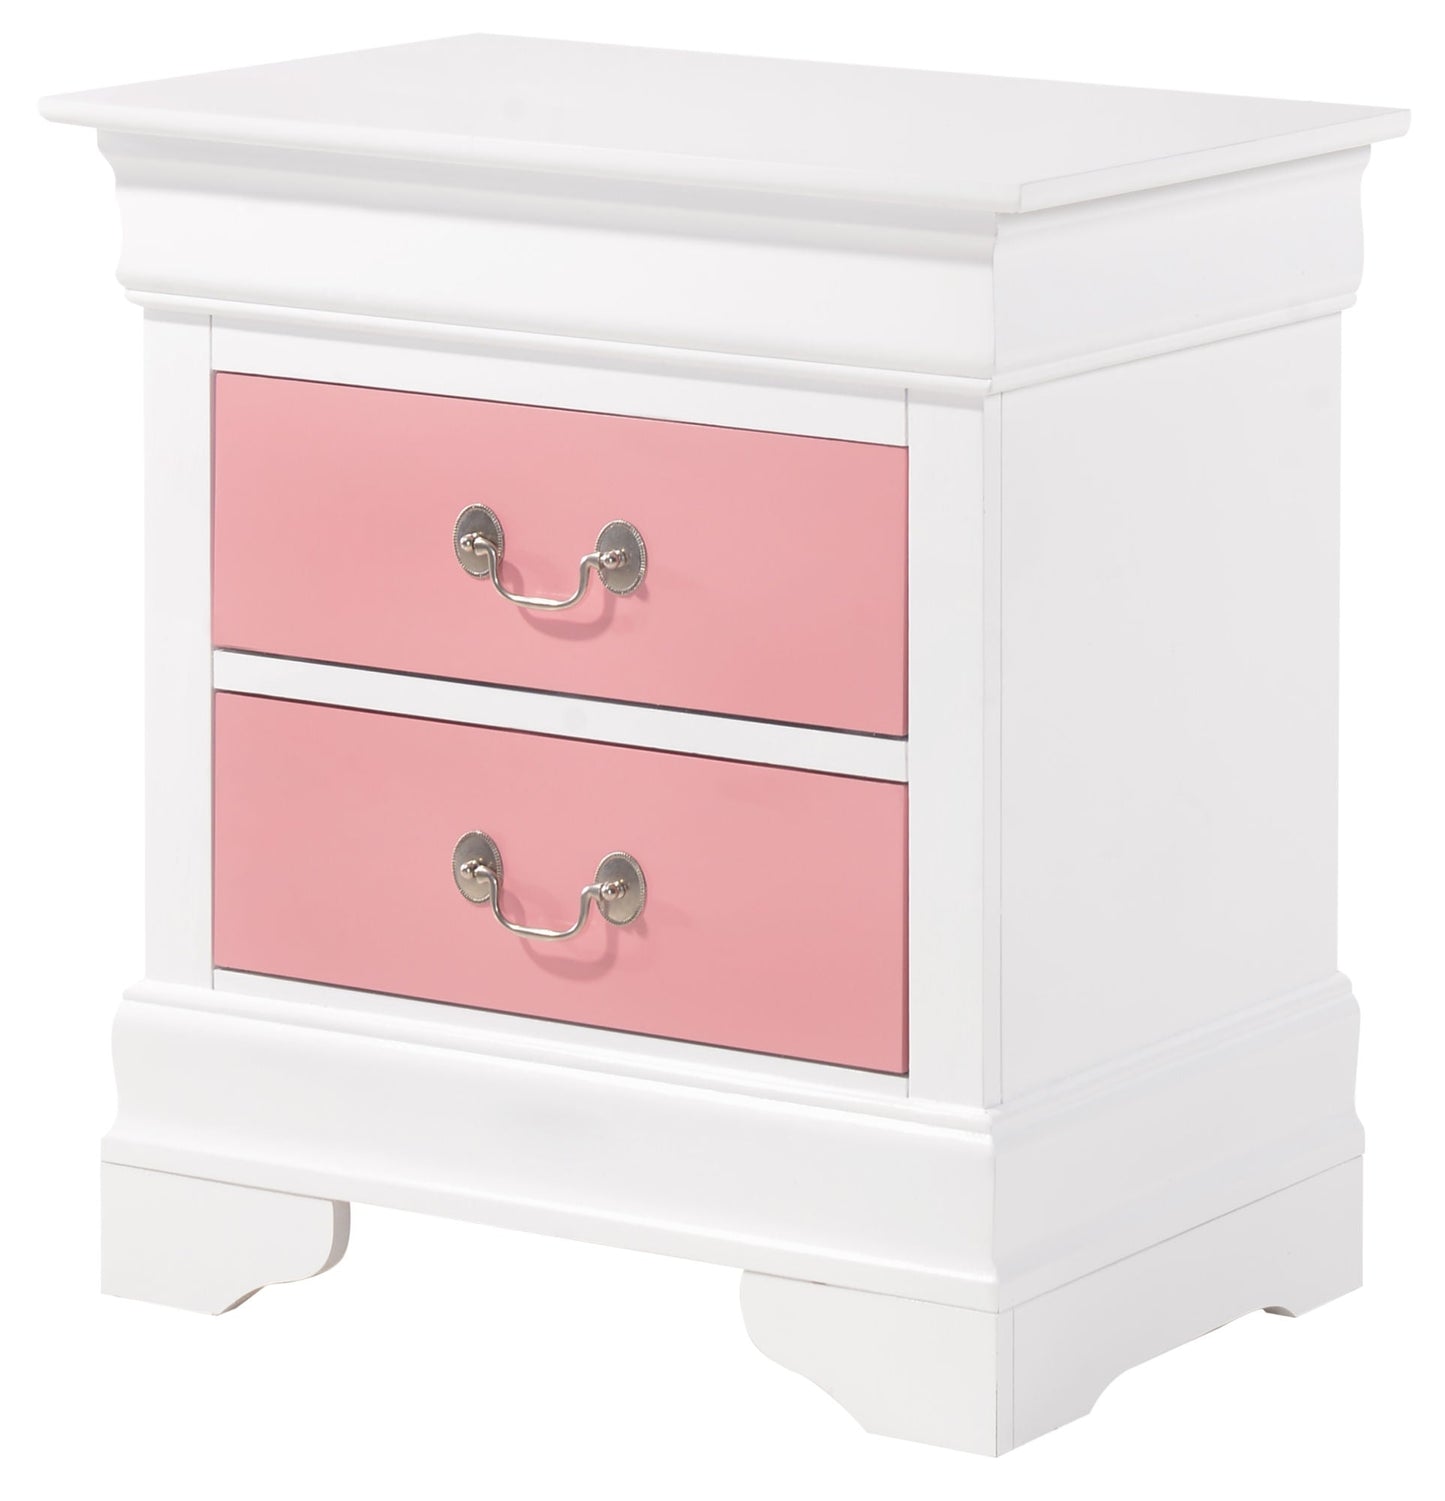 Glory Furniture Louis Phillipe G3193-N Nightstand , Pink Home Decor by Design